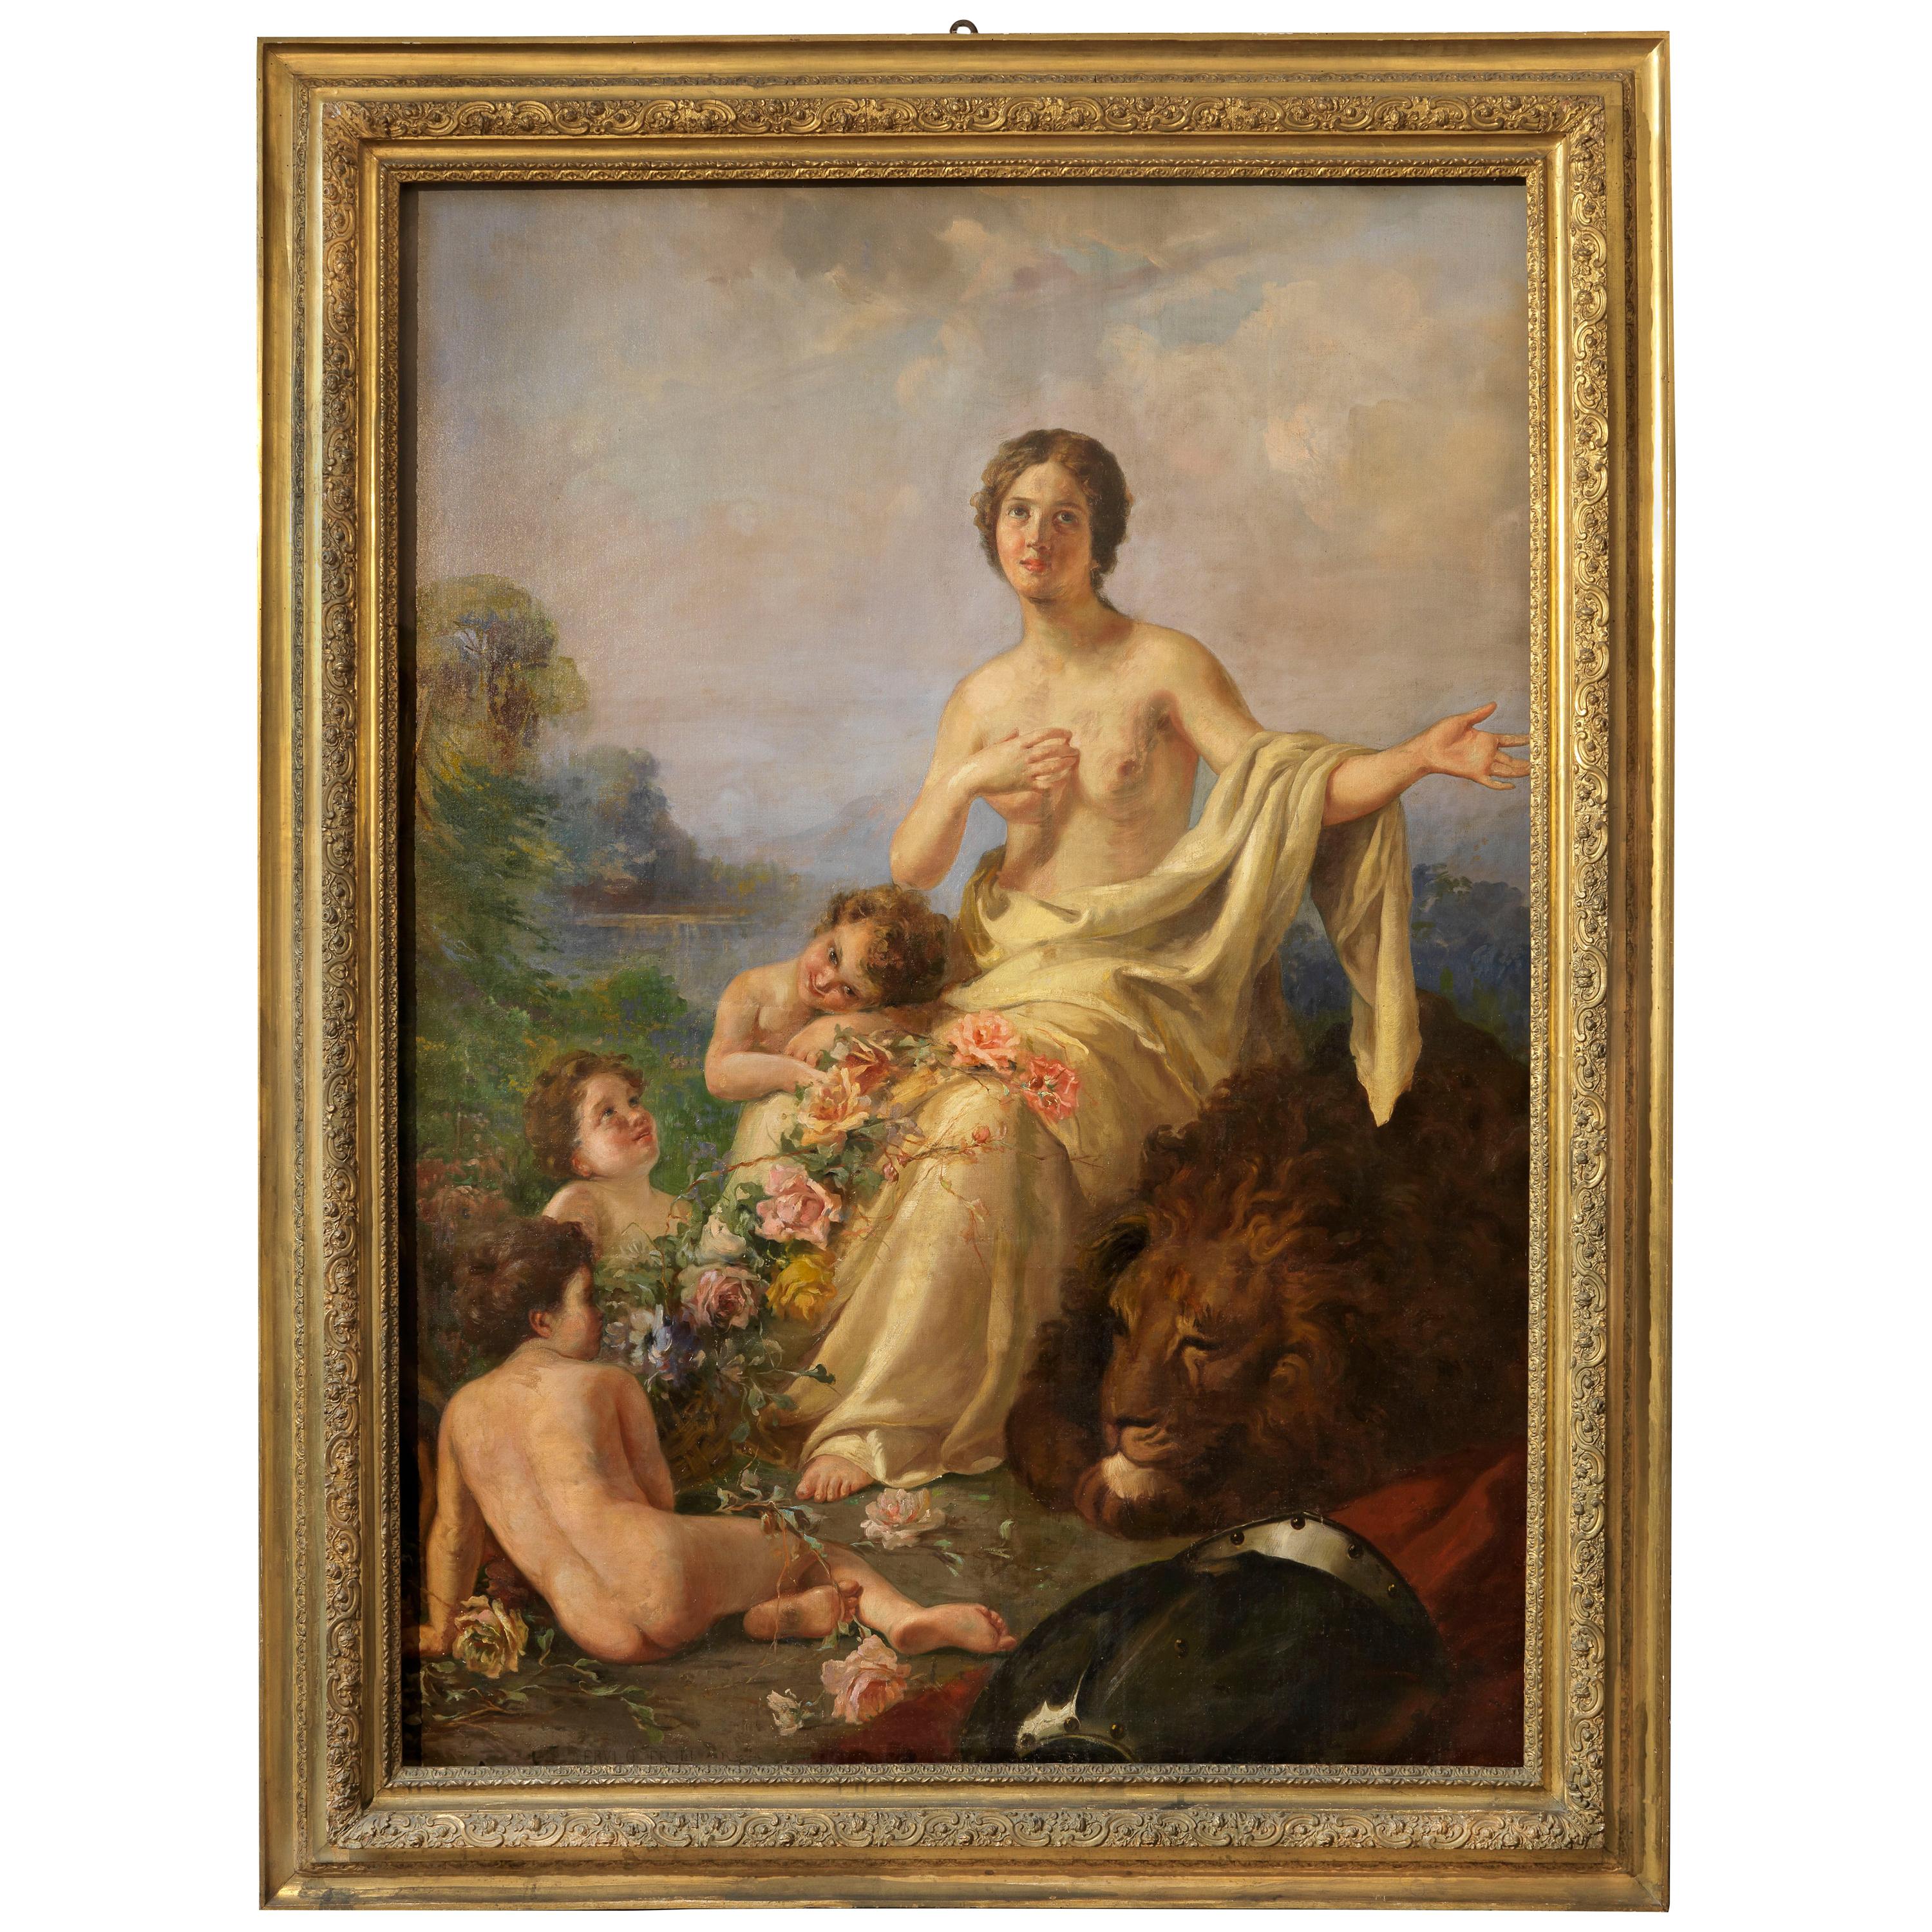 Large and important painting Allegory of Peace oil on canvas by the famous Italian painter Erulo Eroli with a gilt-wood frame.
Provenance from an important aristocratic family.
The painting is in original condition but will be relined and restored